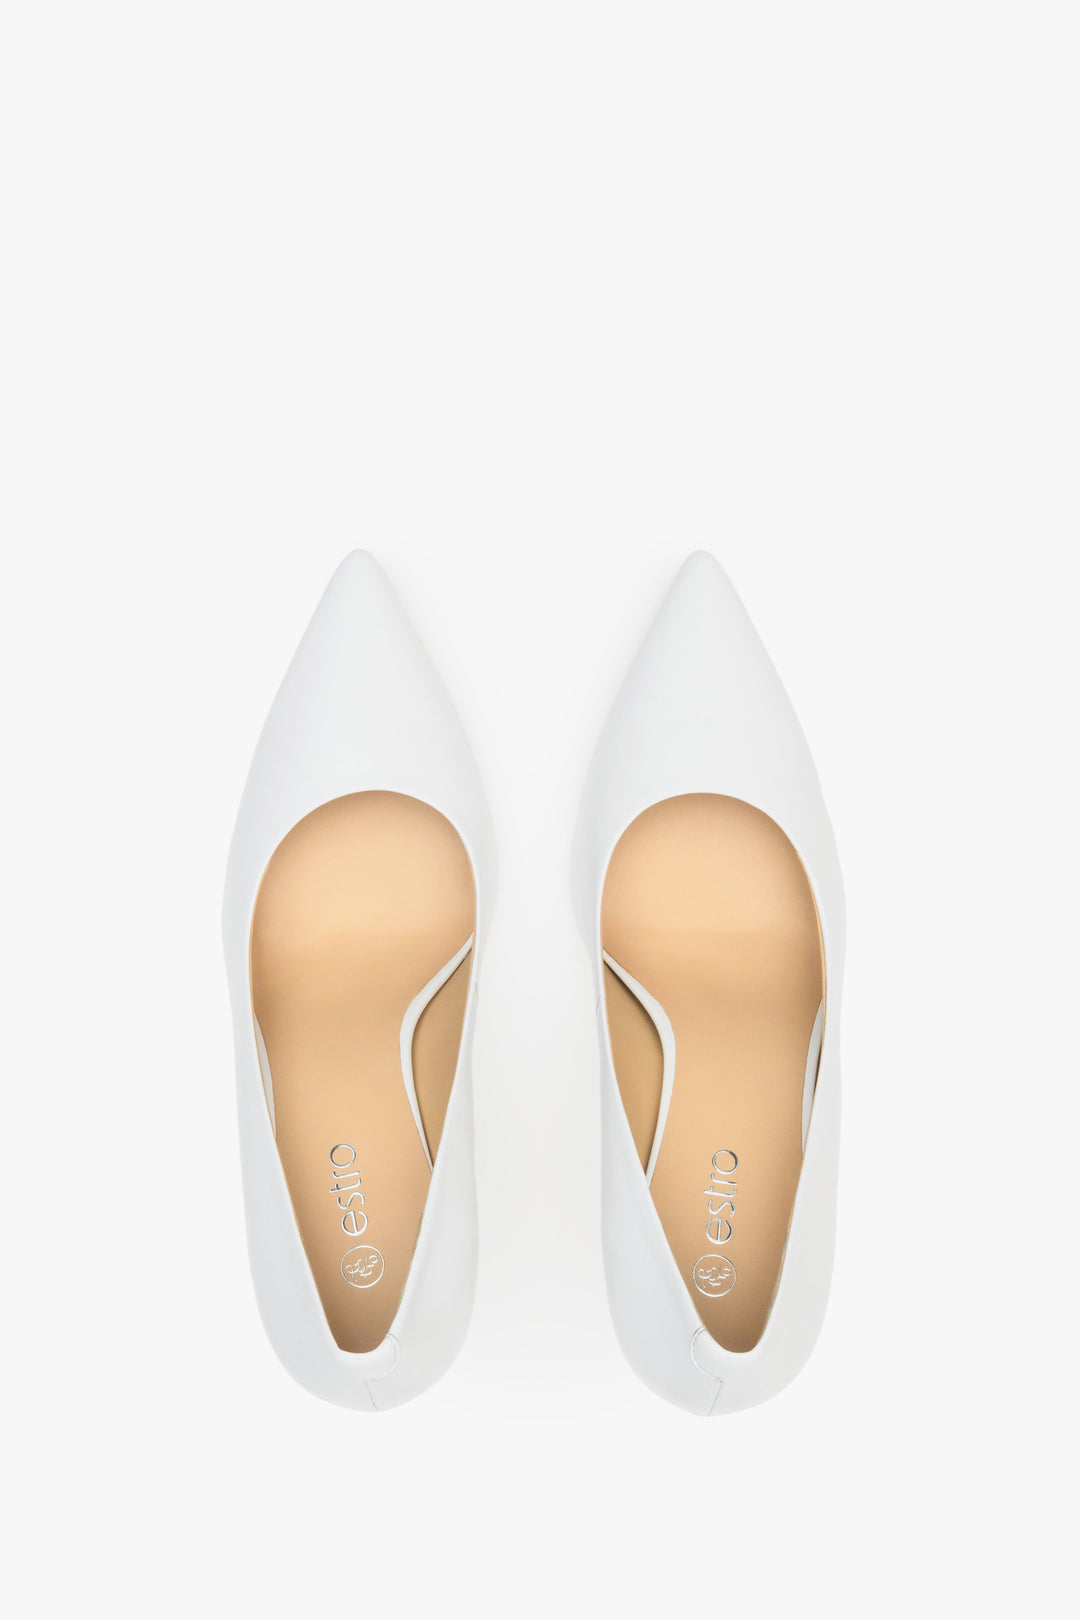 Women's pearlescent pointed heels with a tip, Estro, made of leather.